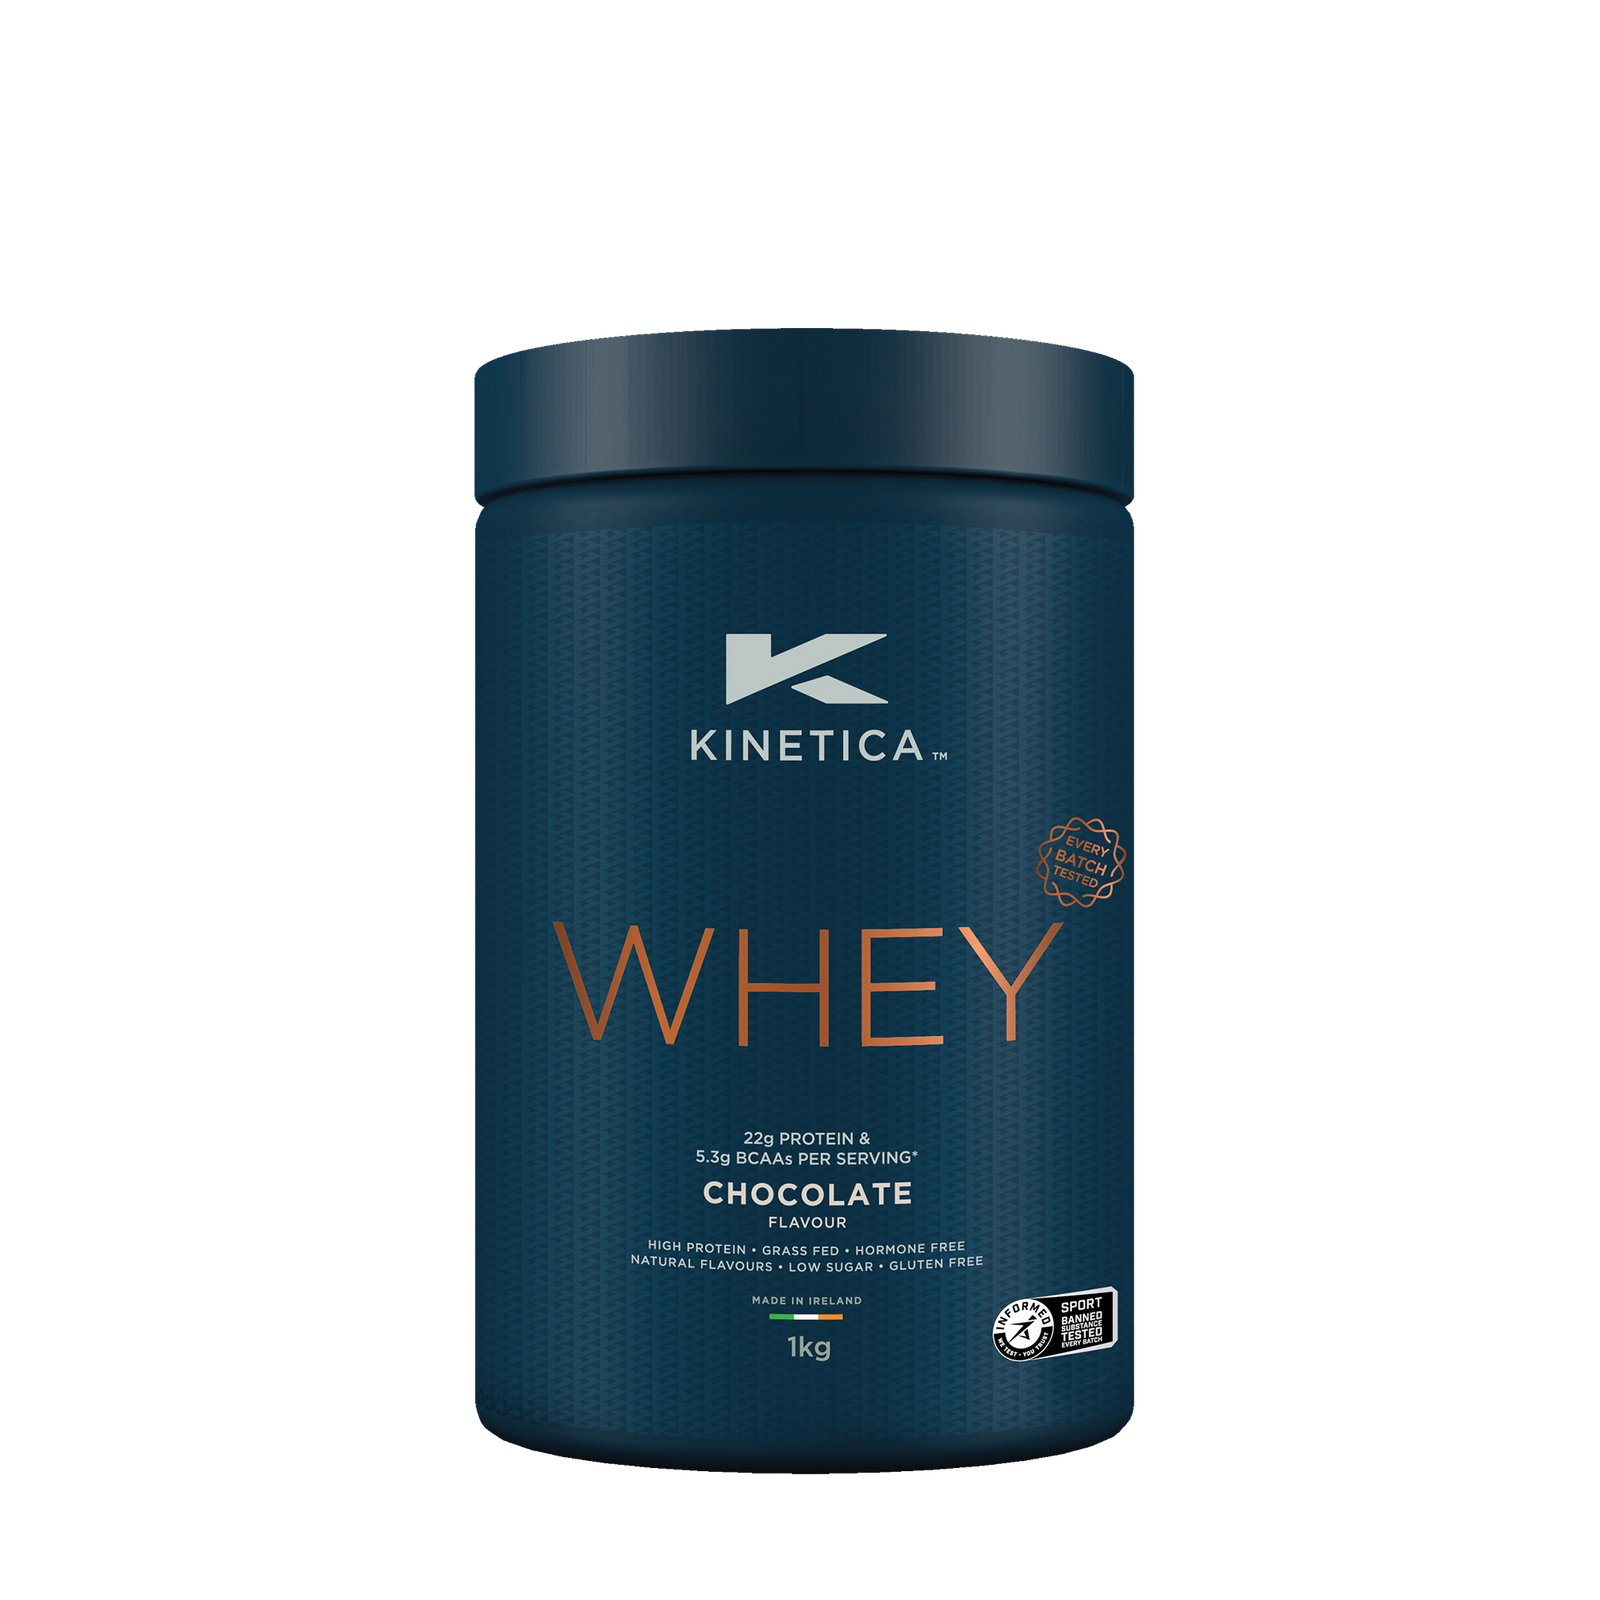 KINETICA – WHEY PROTEIN (1KG)